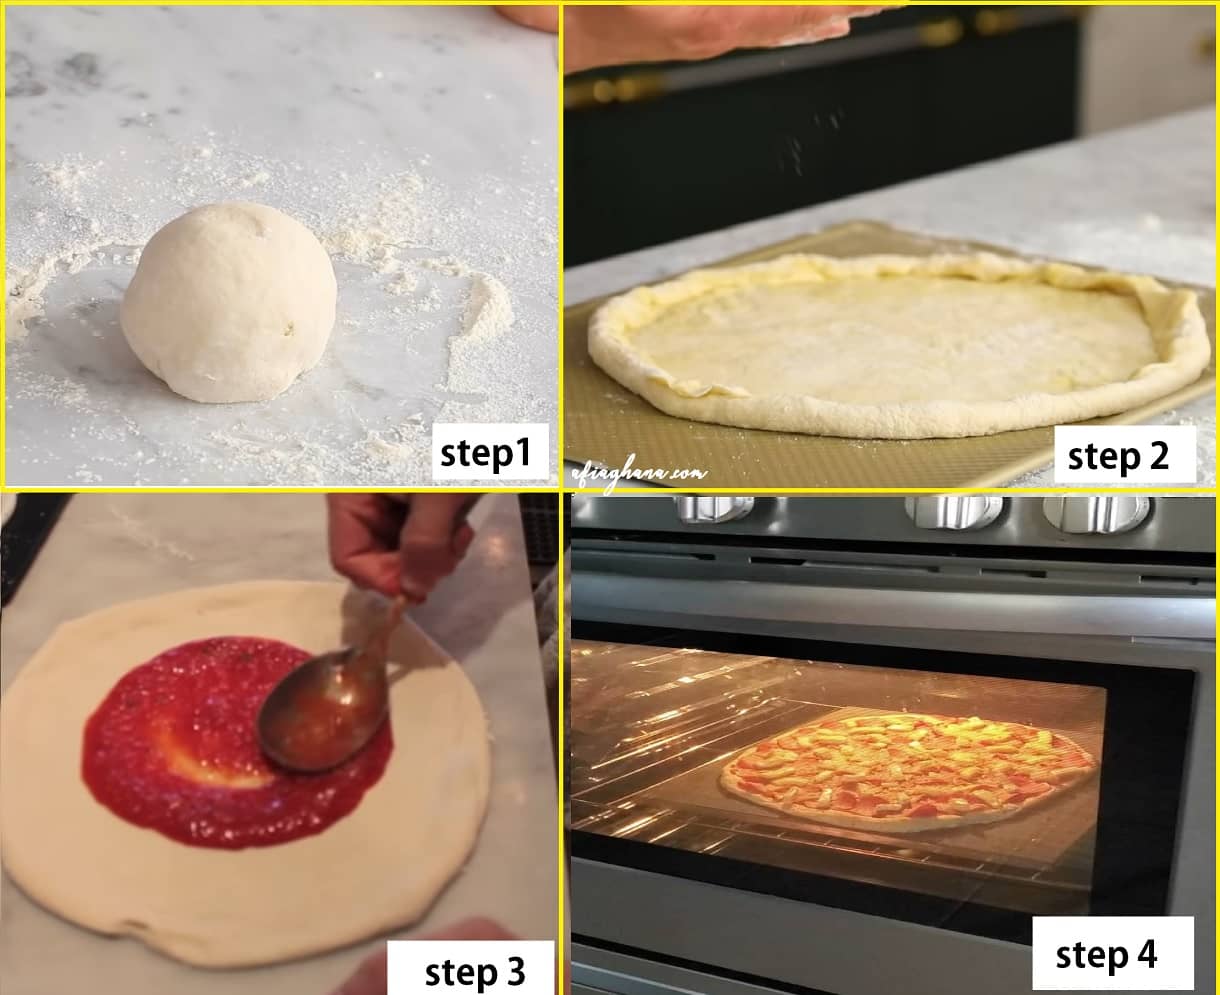 How to make pizza at home step by step